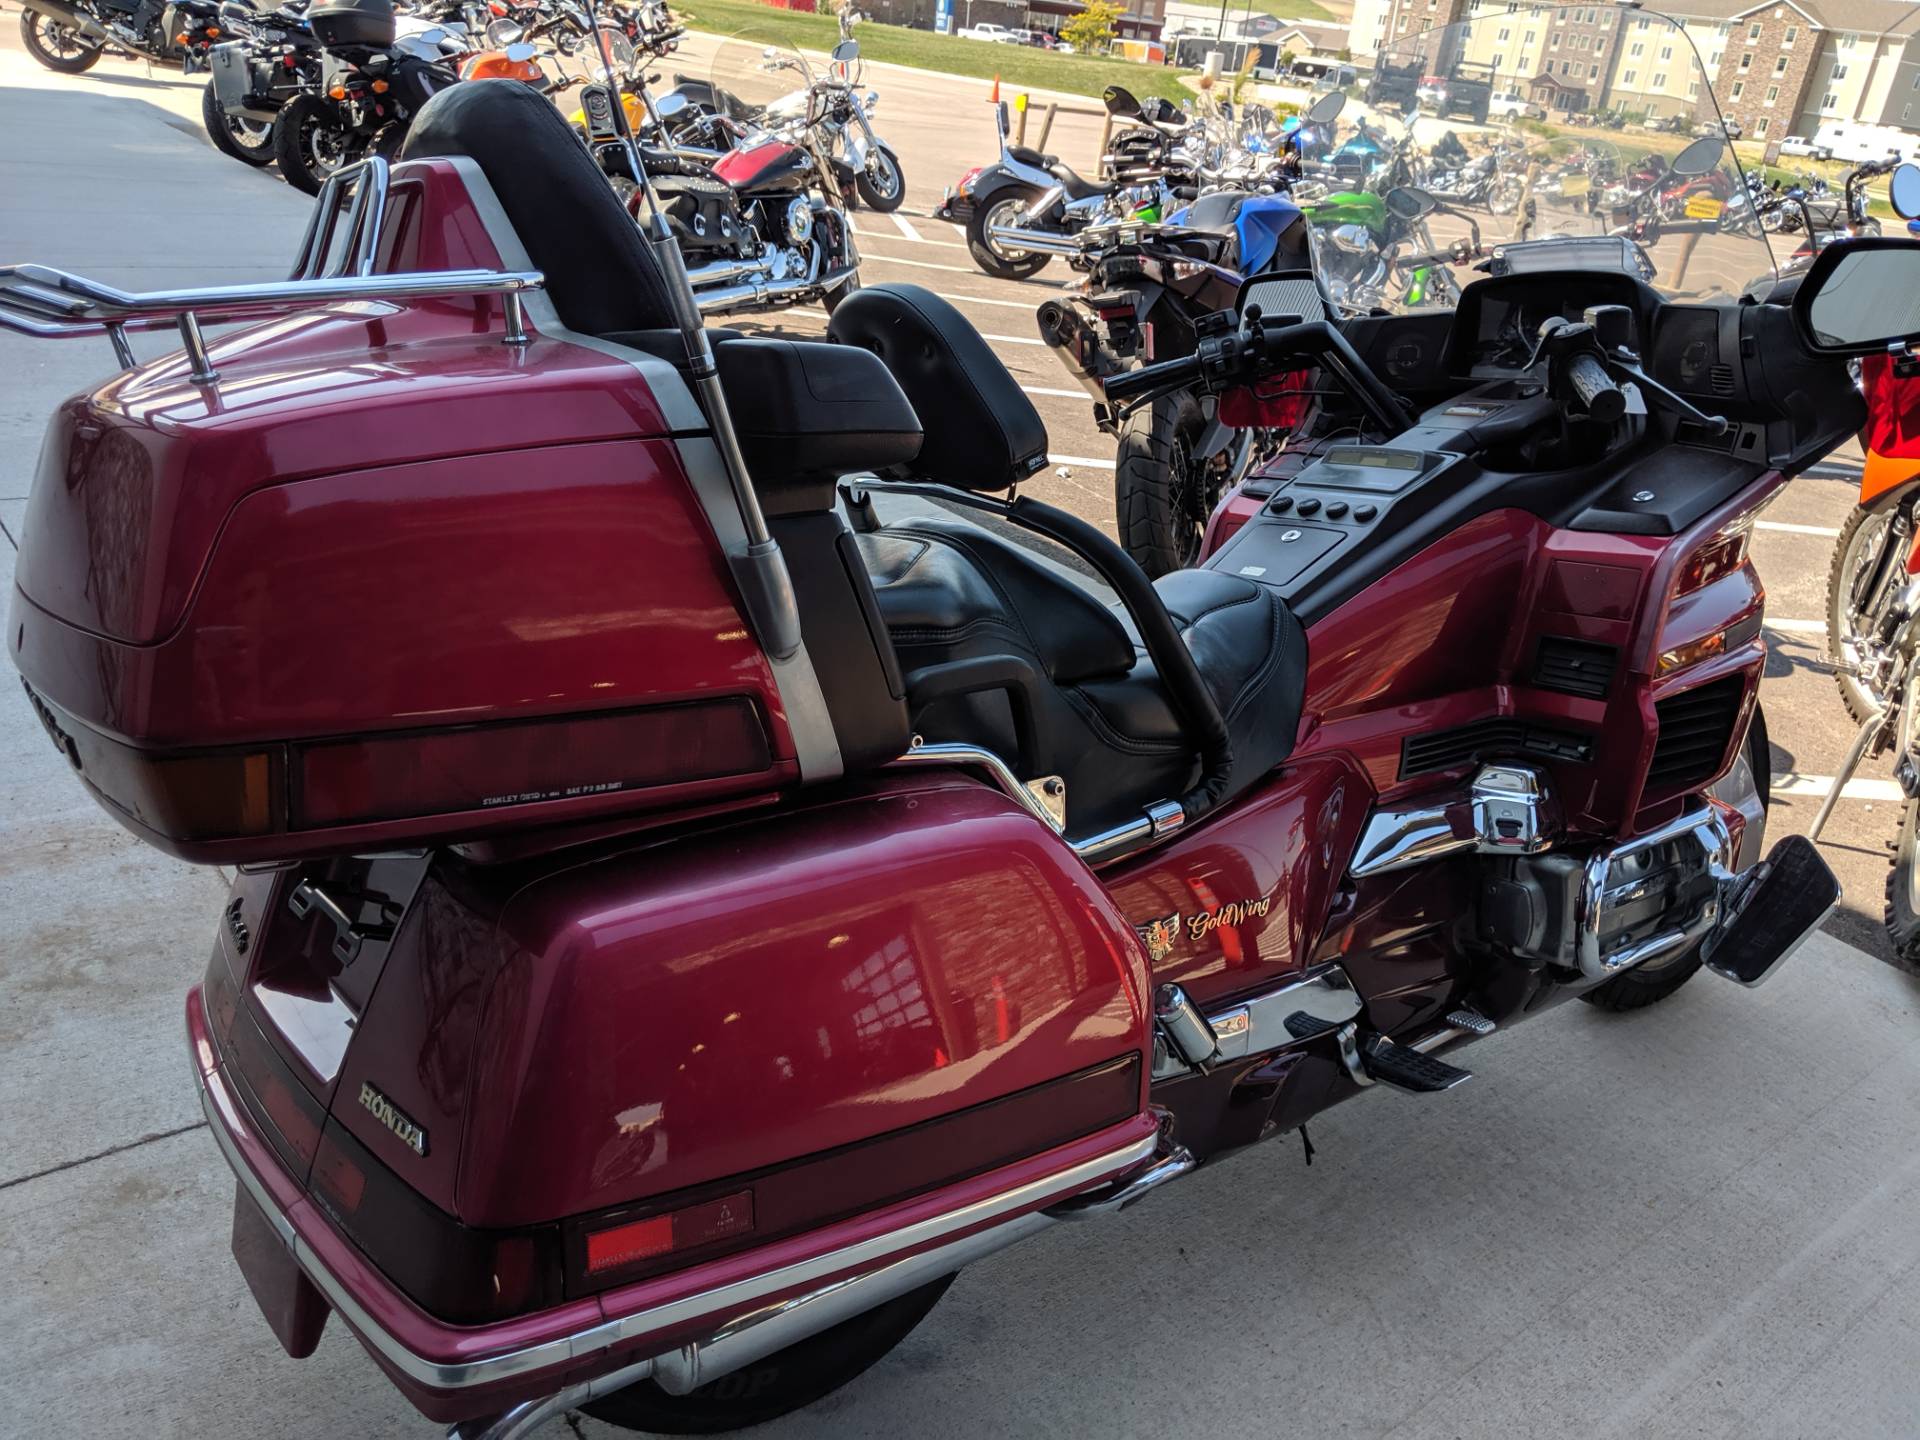 Used 1994 Honda GL1500 Goldwing Motorcycles in Rapid City, SD